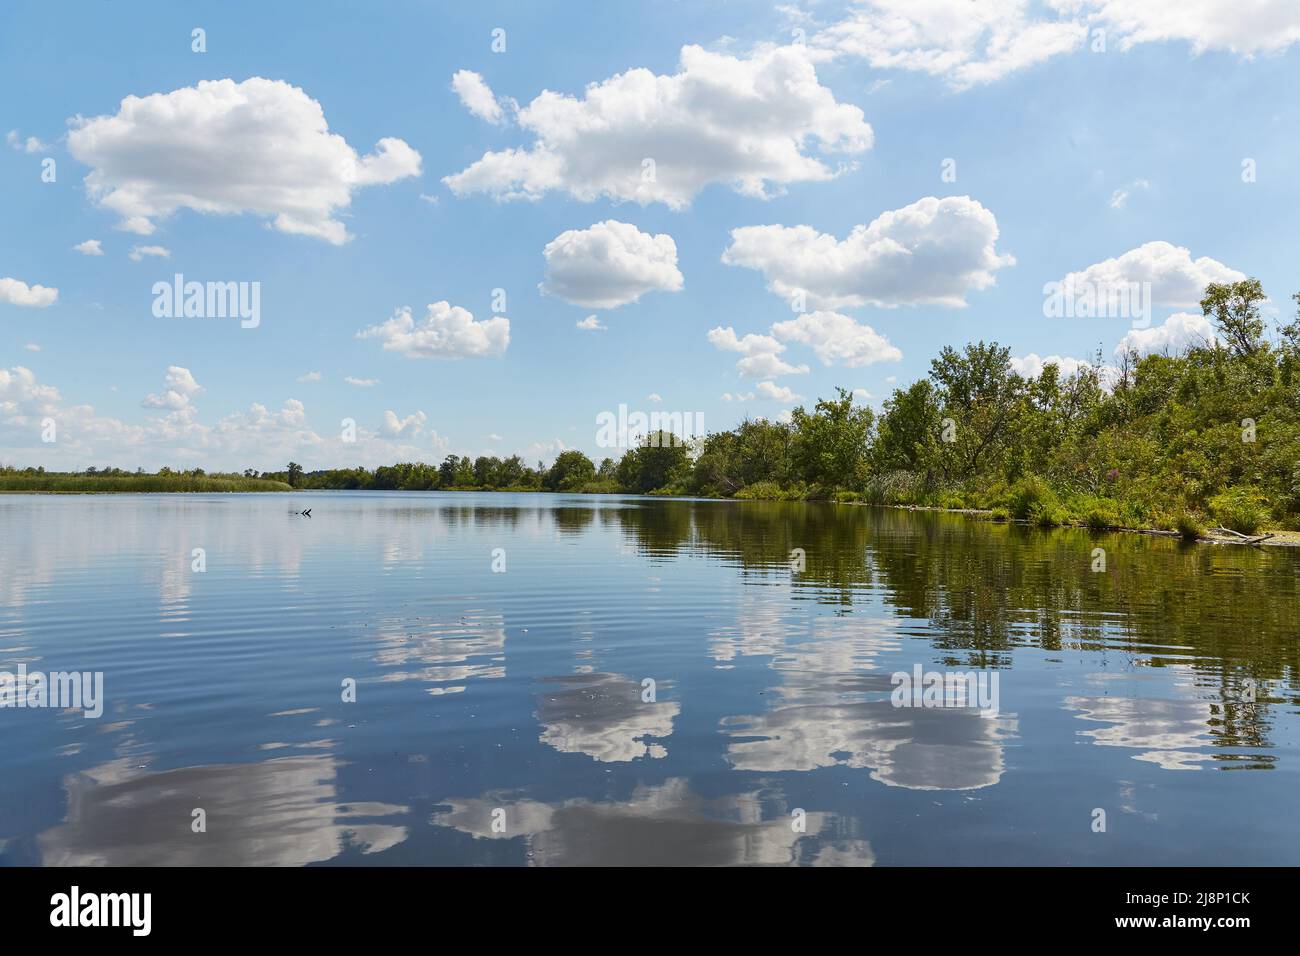 Water surface lake with trees Stock Photo